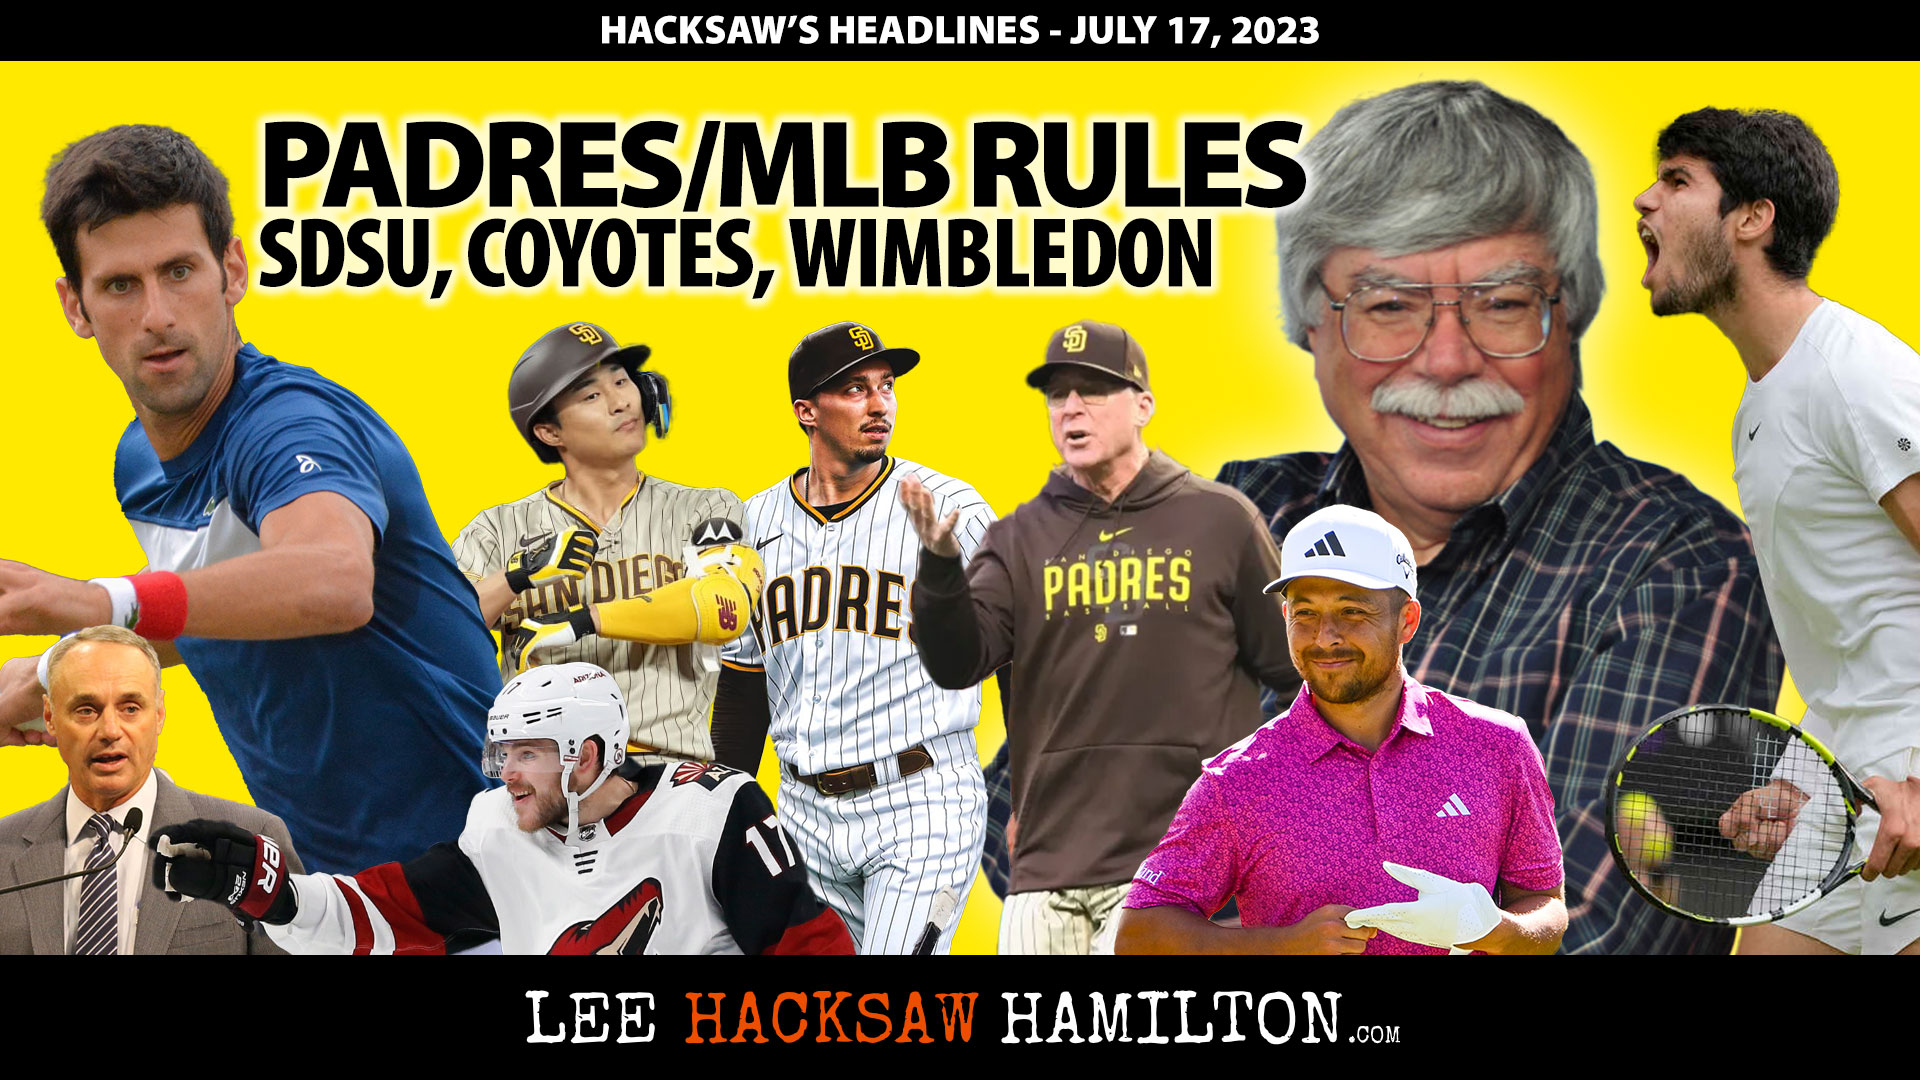 Lee Hacksaw Hamilton discusses Padres Lost Weekend, MLB Rules, SDSU vs MWC, Tennessee, Coyotes, Tennis, Golf